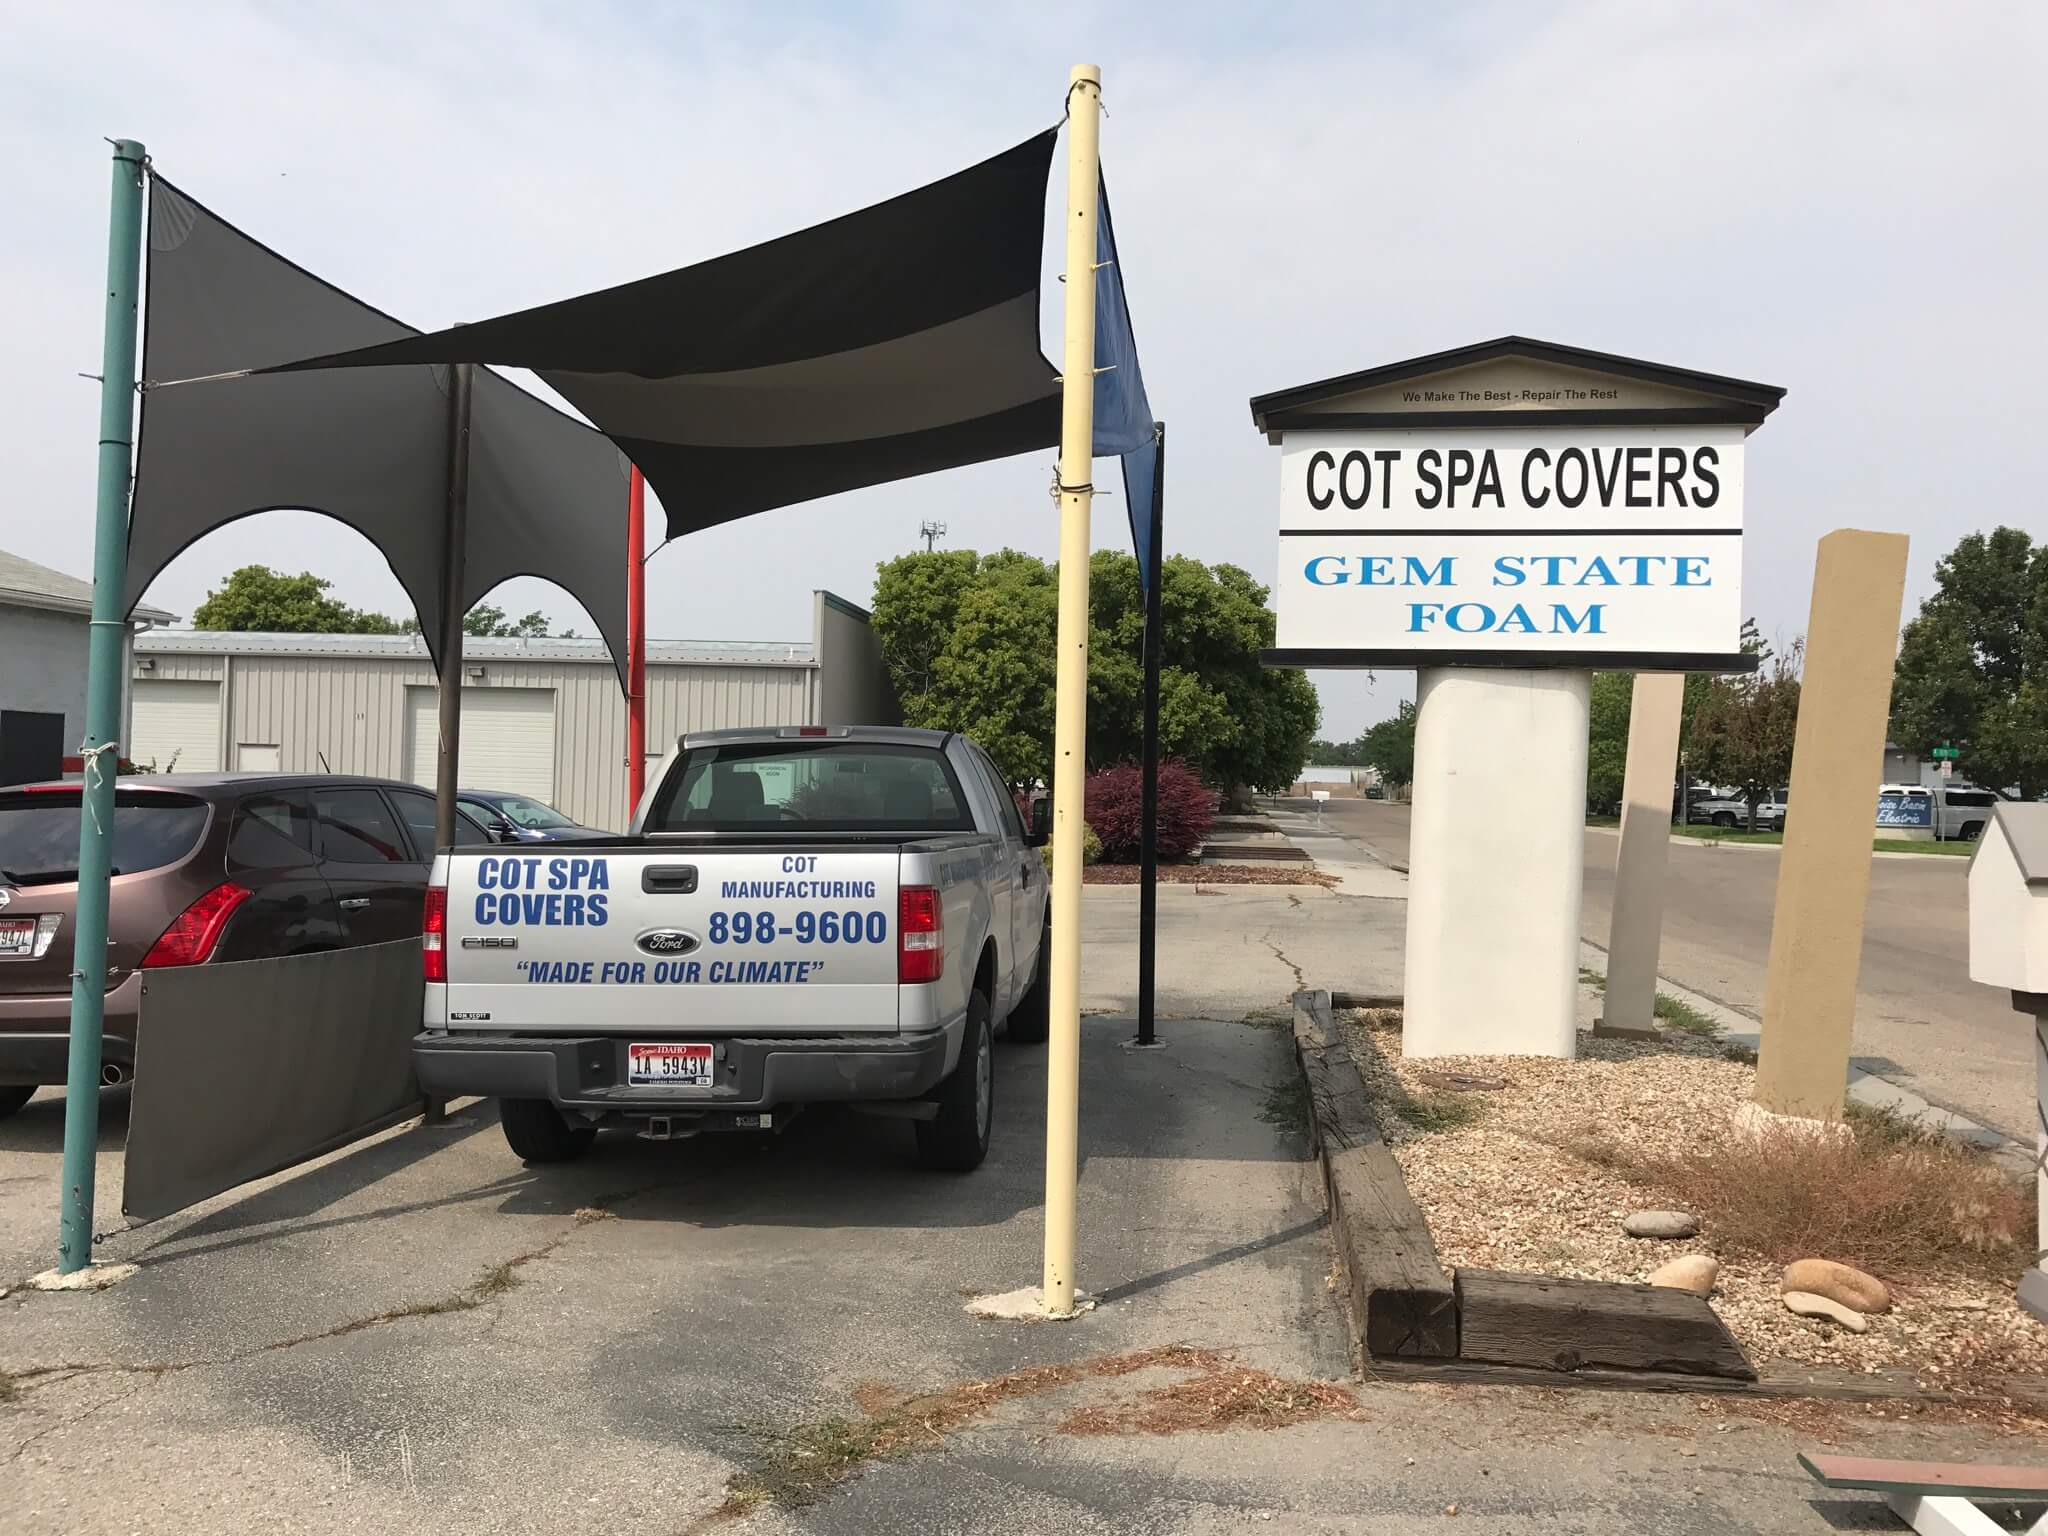 An image of an awning Cot Spa Covers made for personal use